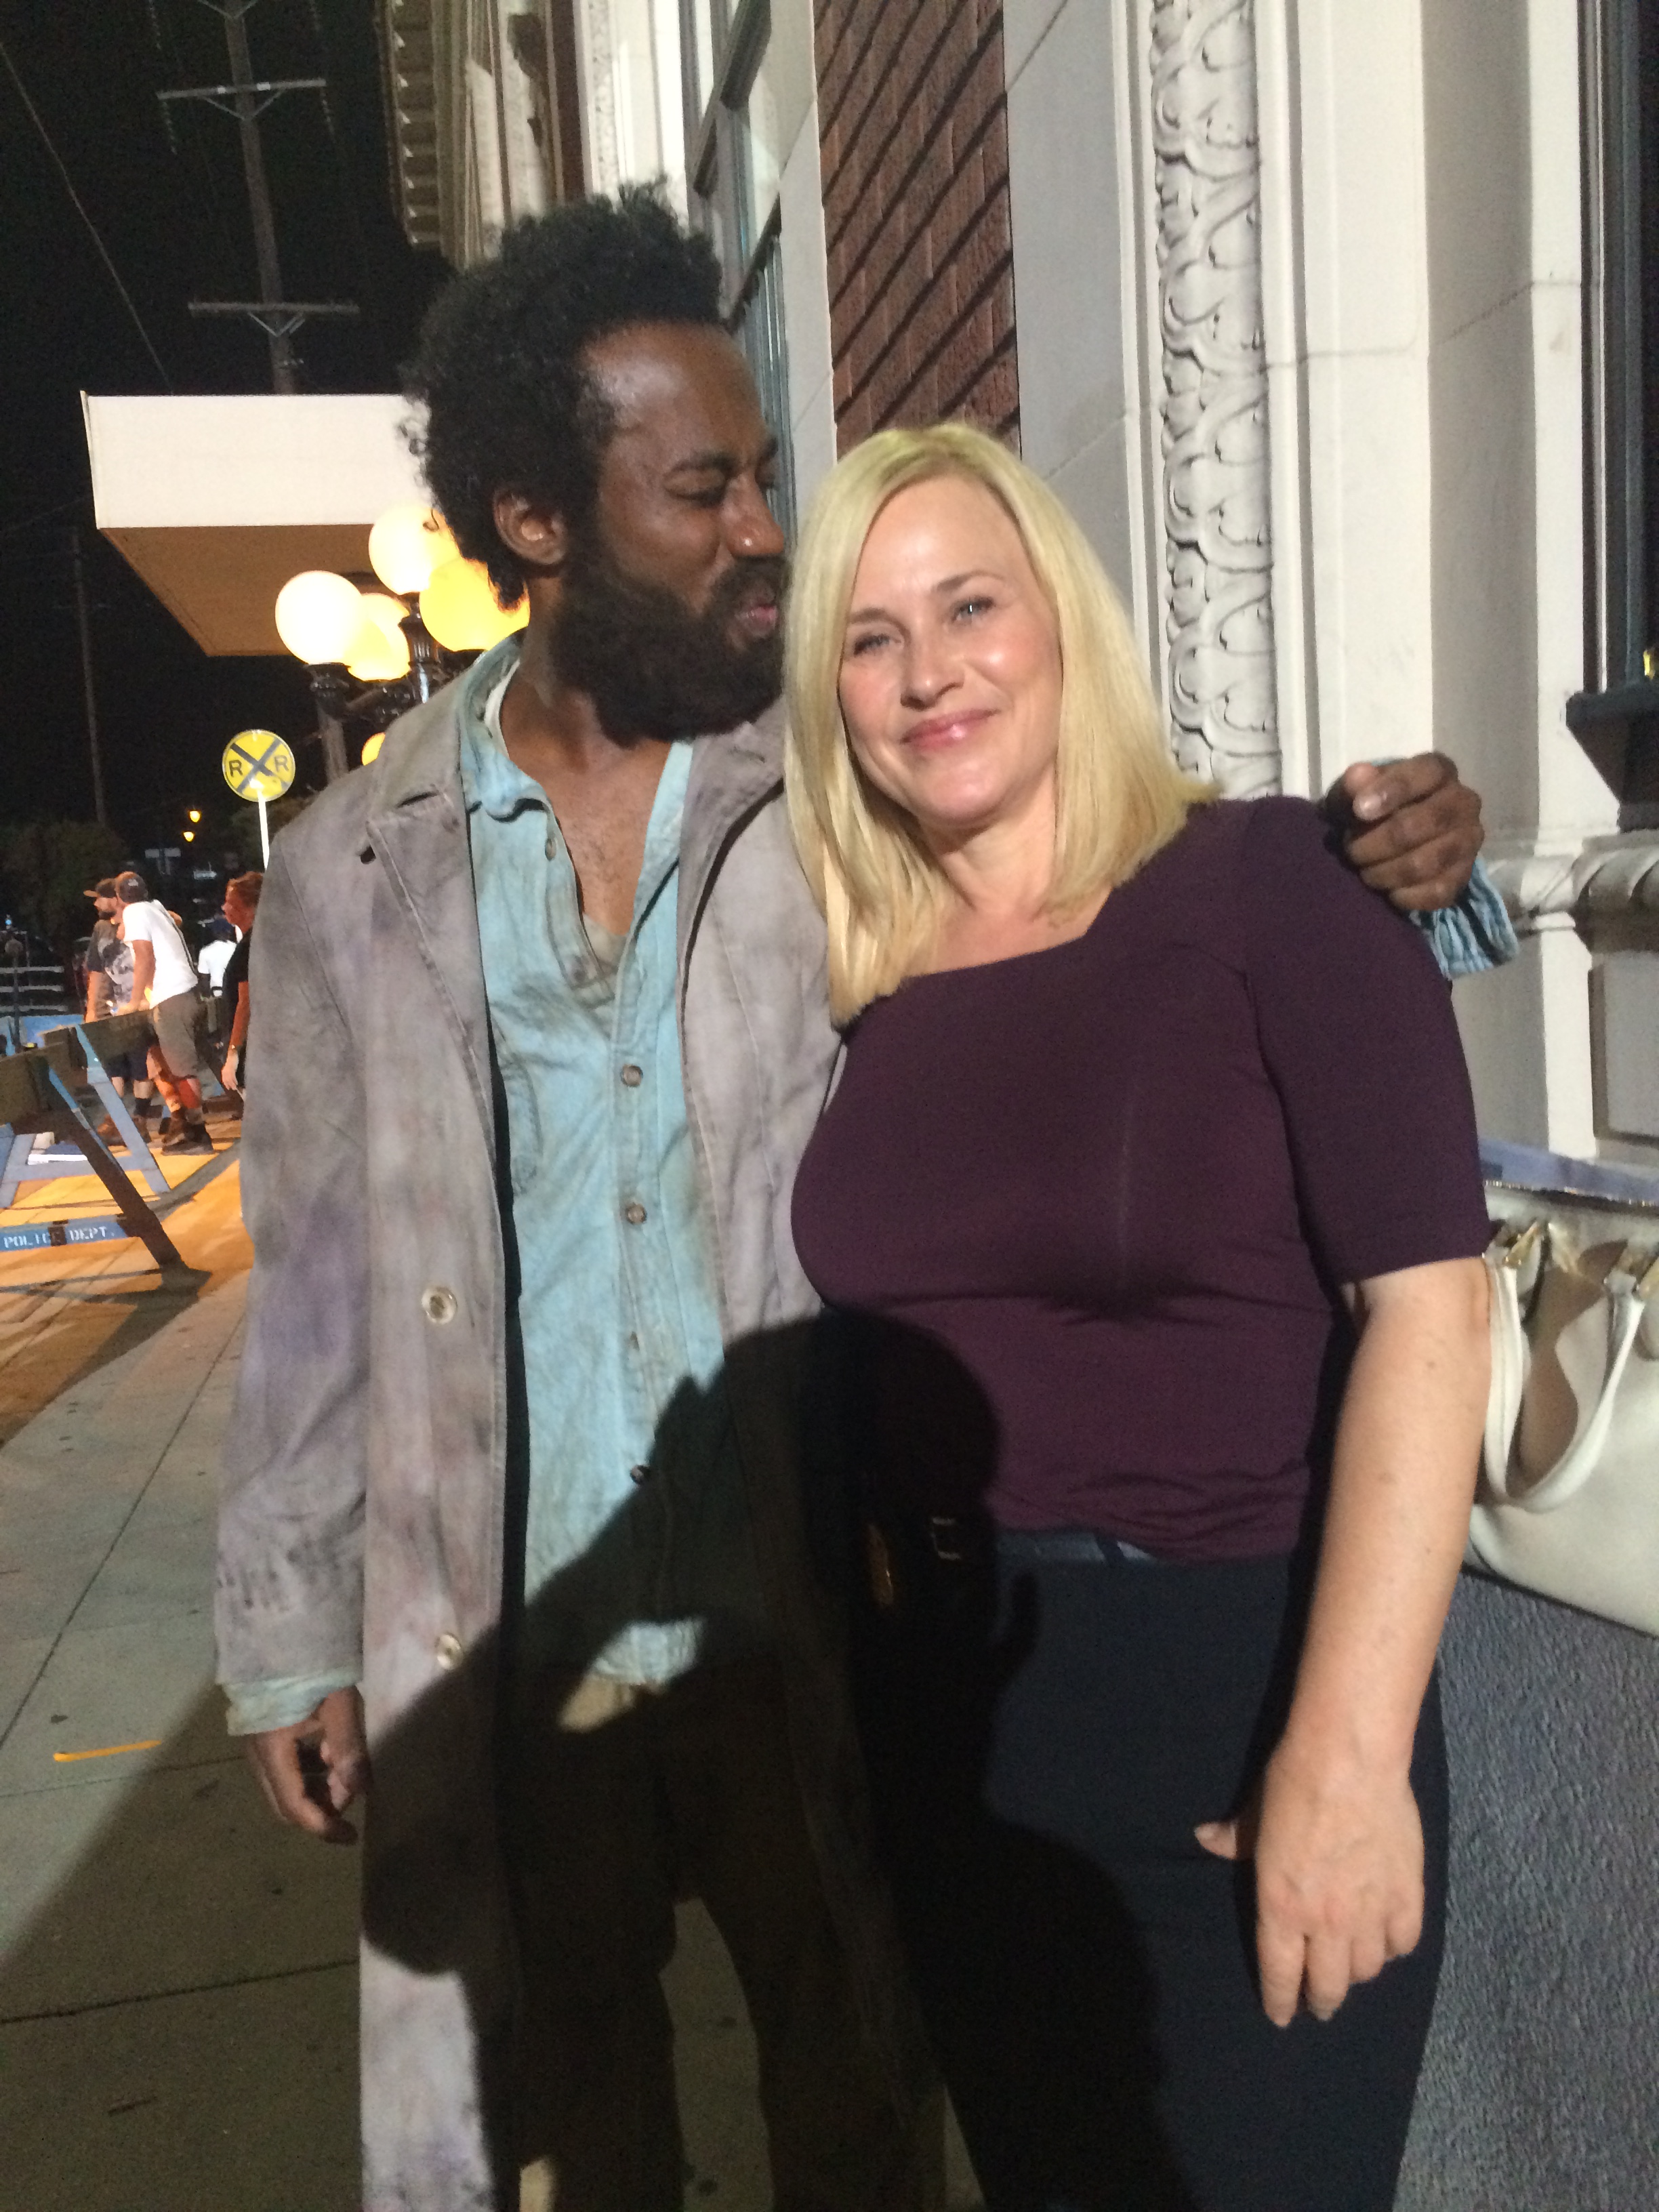 Larry Bam Hall and Patricia Arquette on set of CSI: Cyber